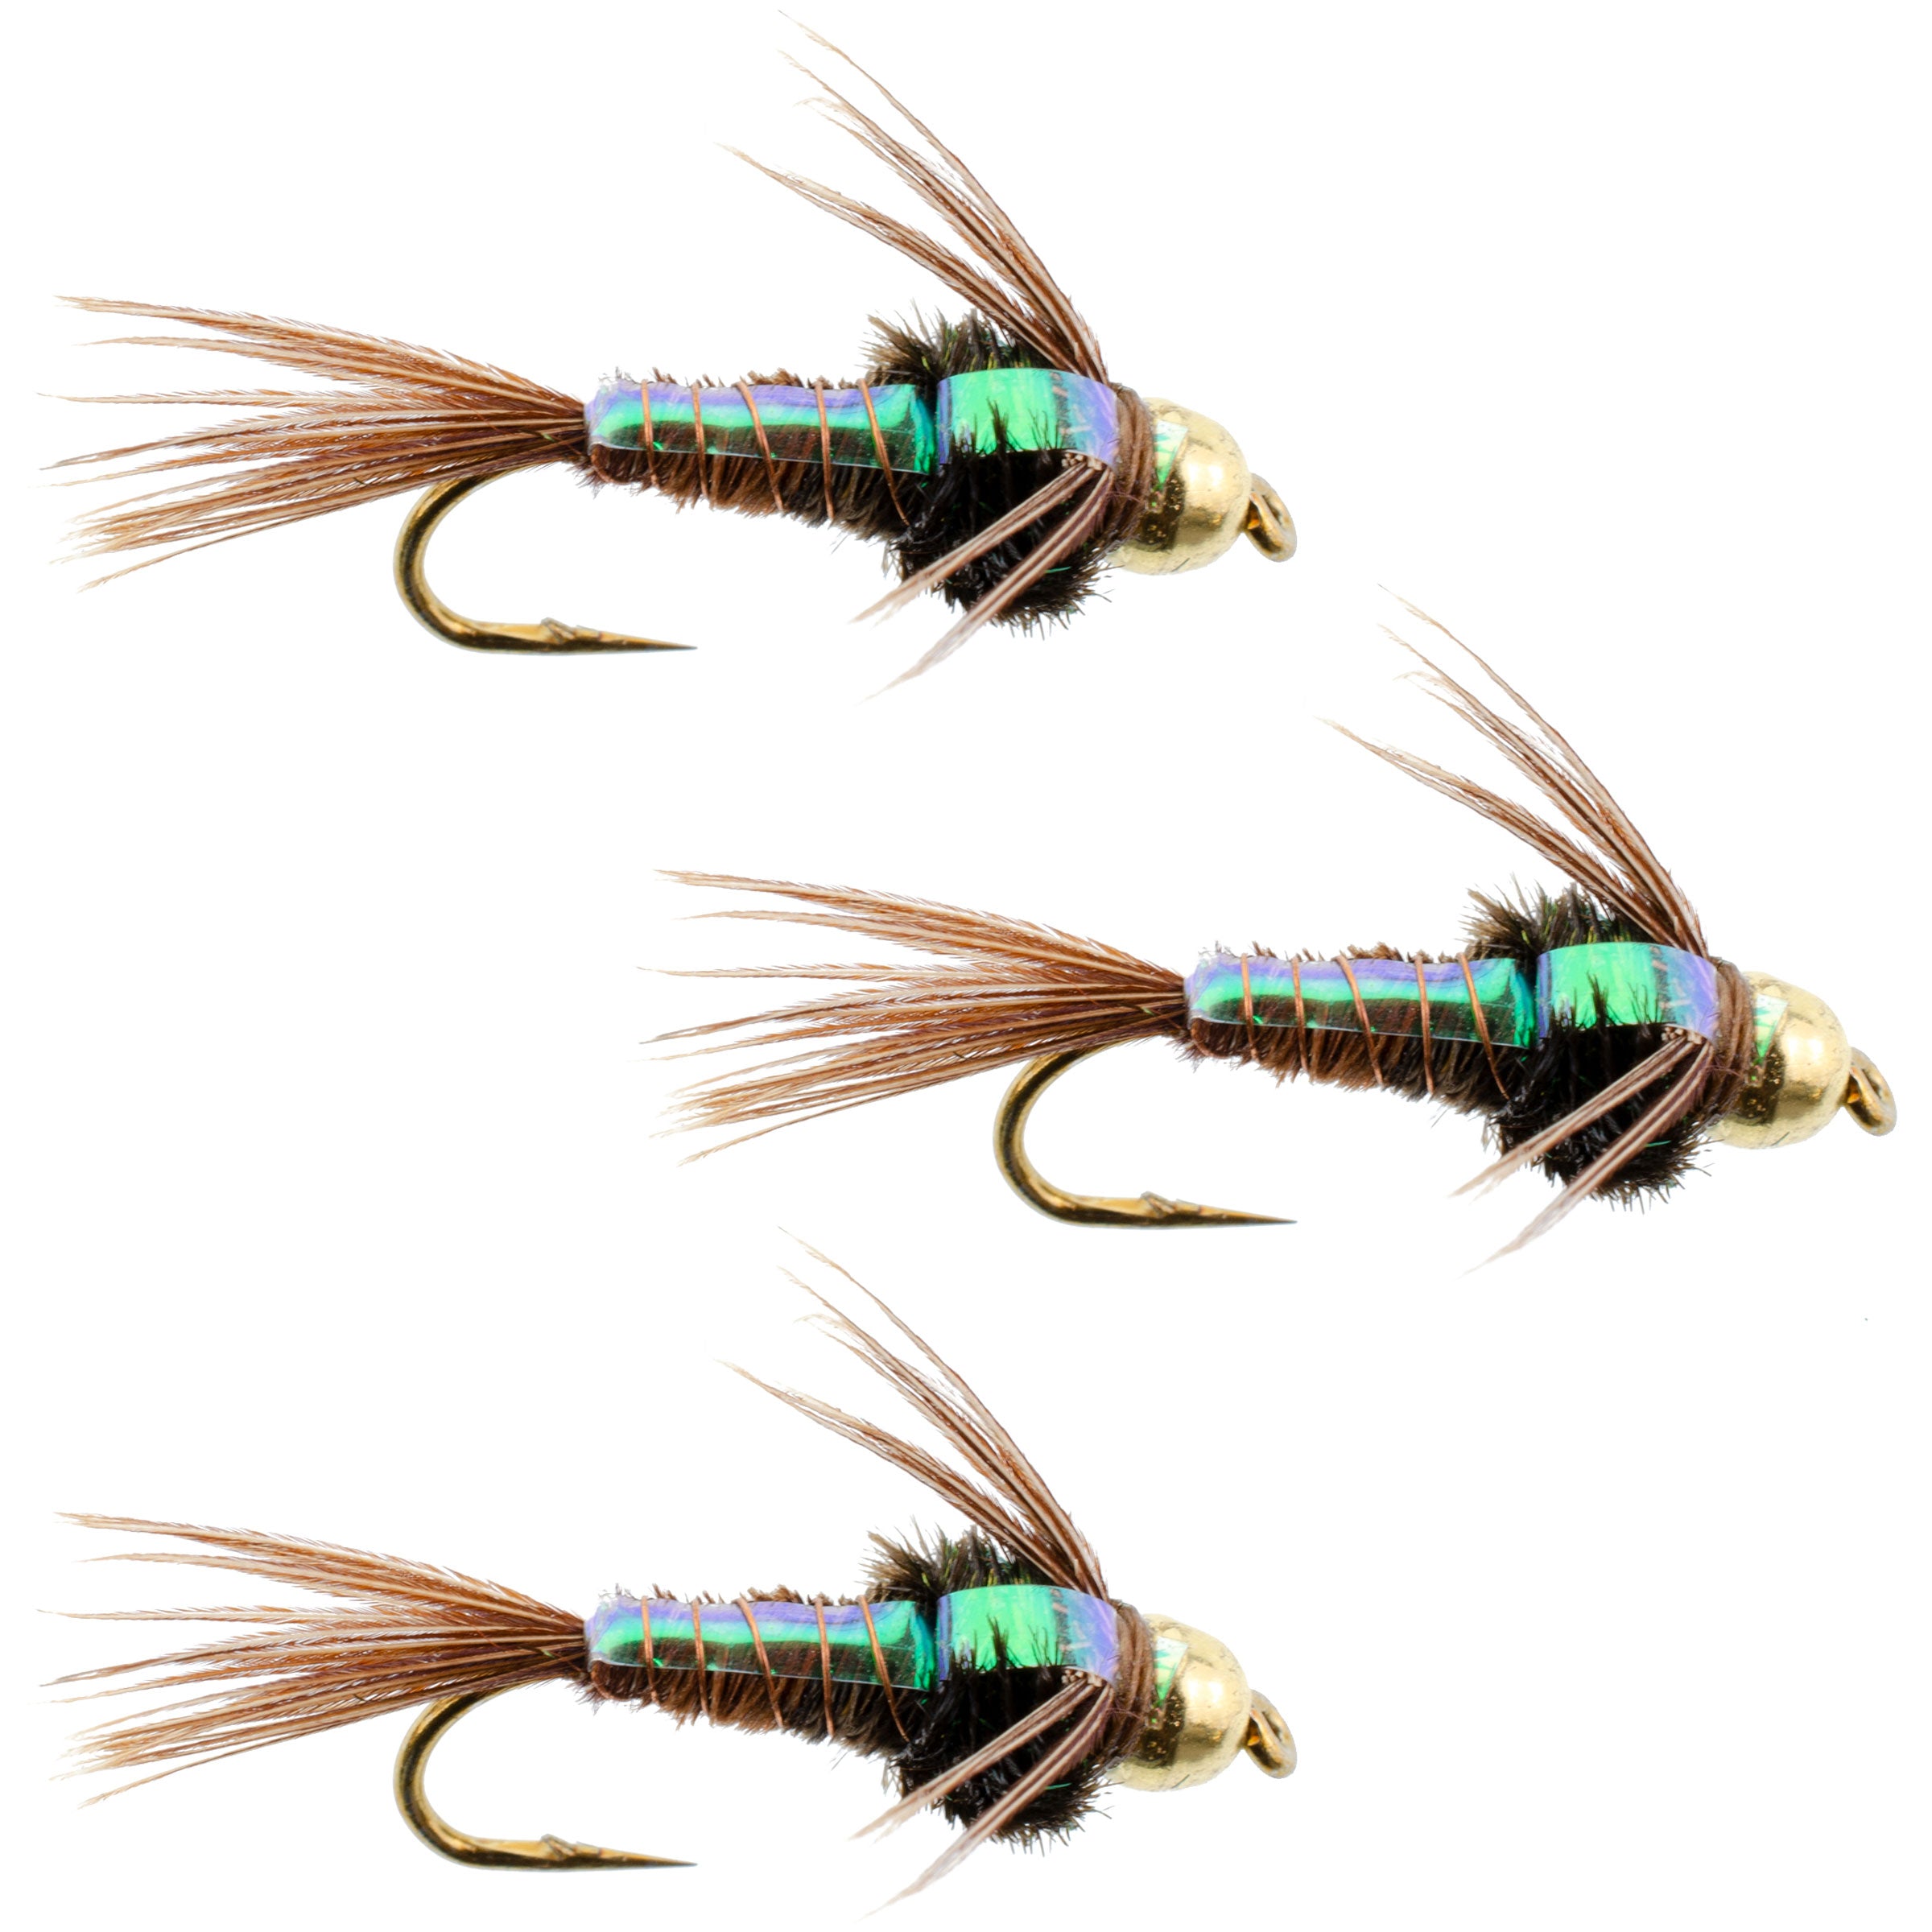 3 Pack Bead Head Flashback Pheasant Tail Nymph Fly Fishing Flies Hook Size 12